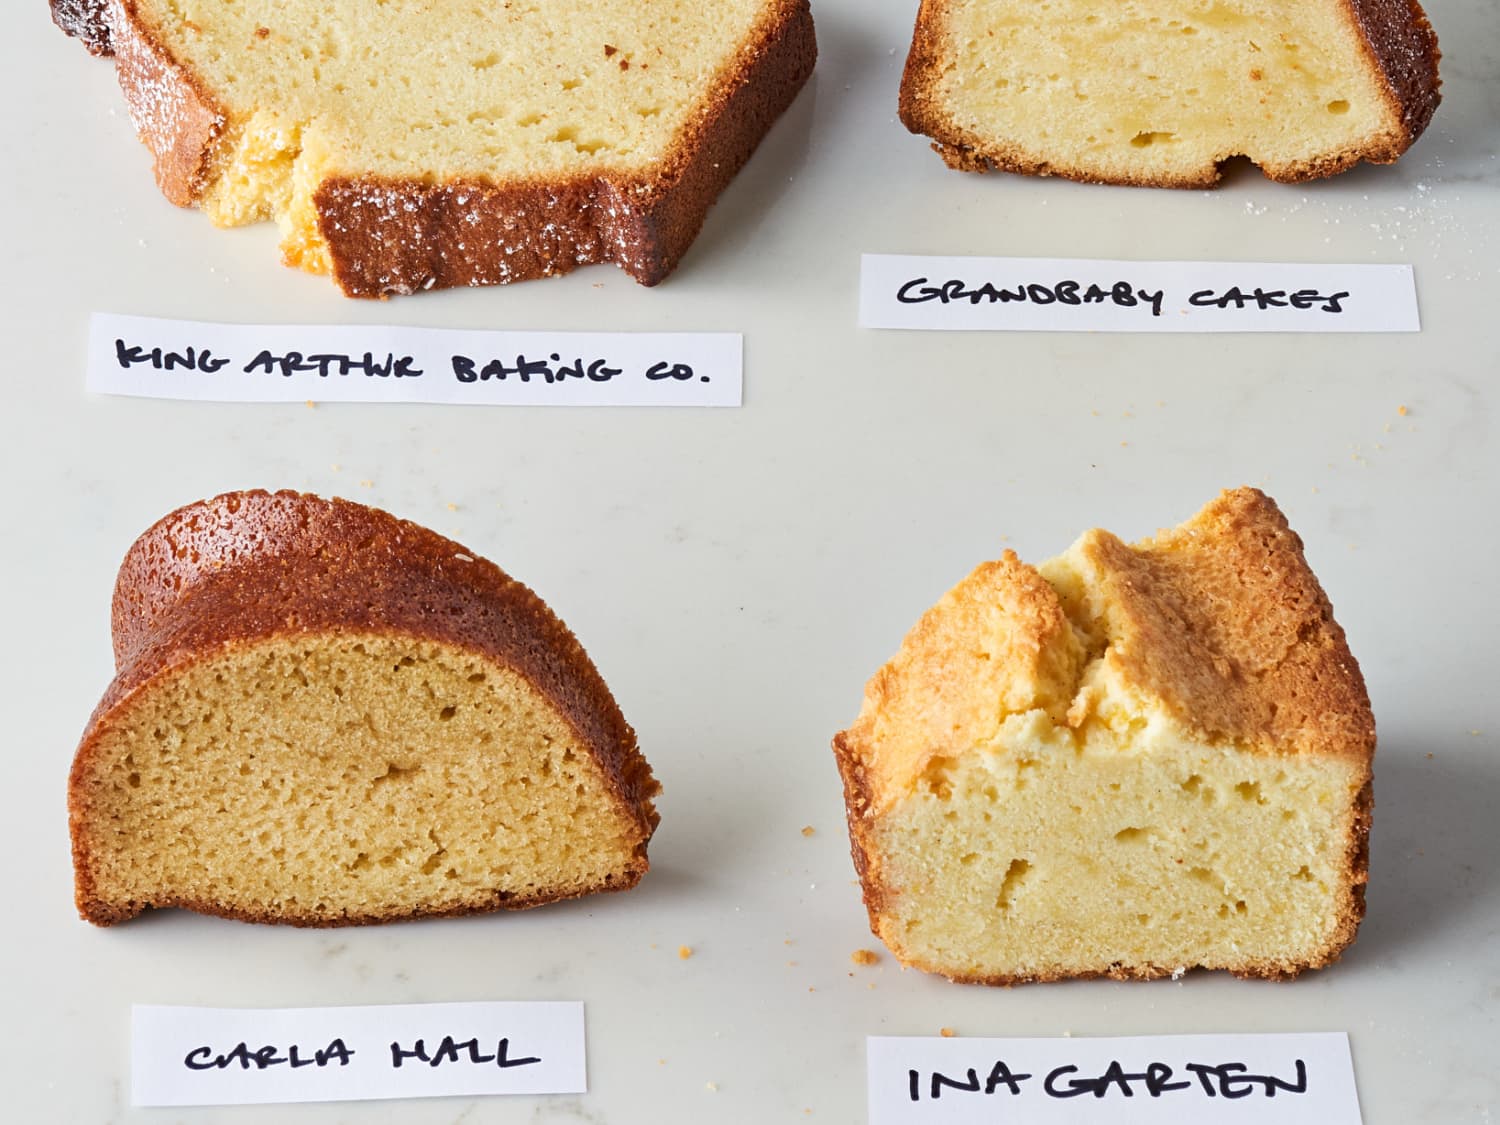 Perfect Pound Cake Recipe - How to Make the Best Pound Cake